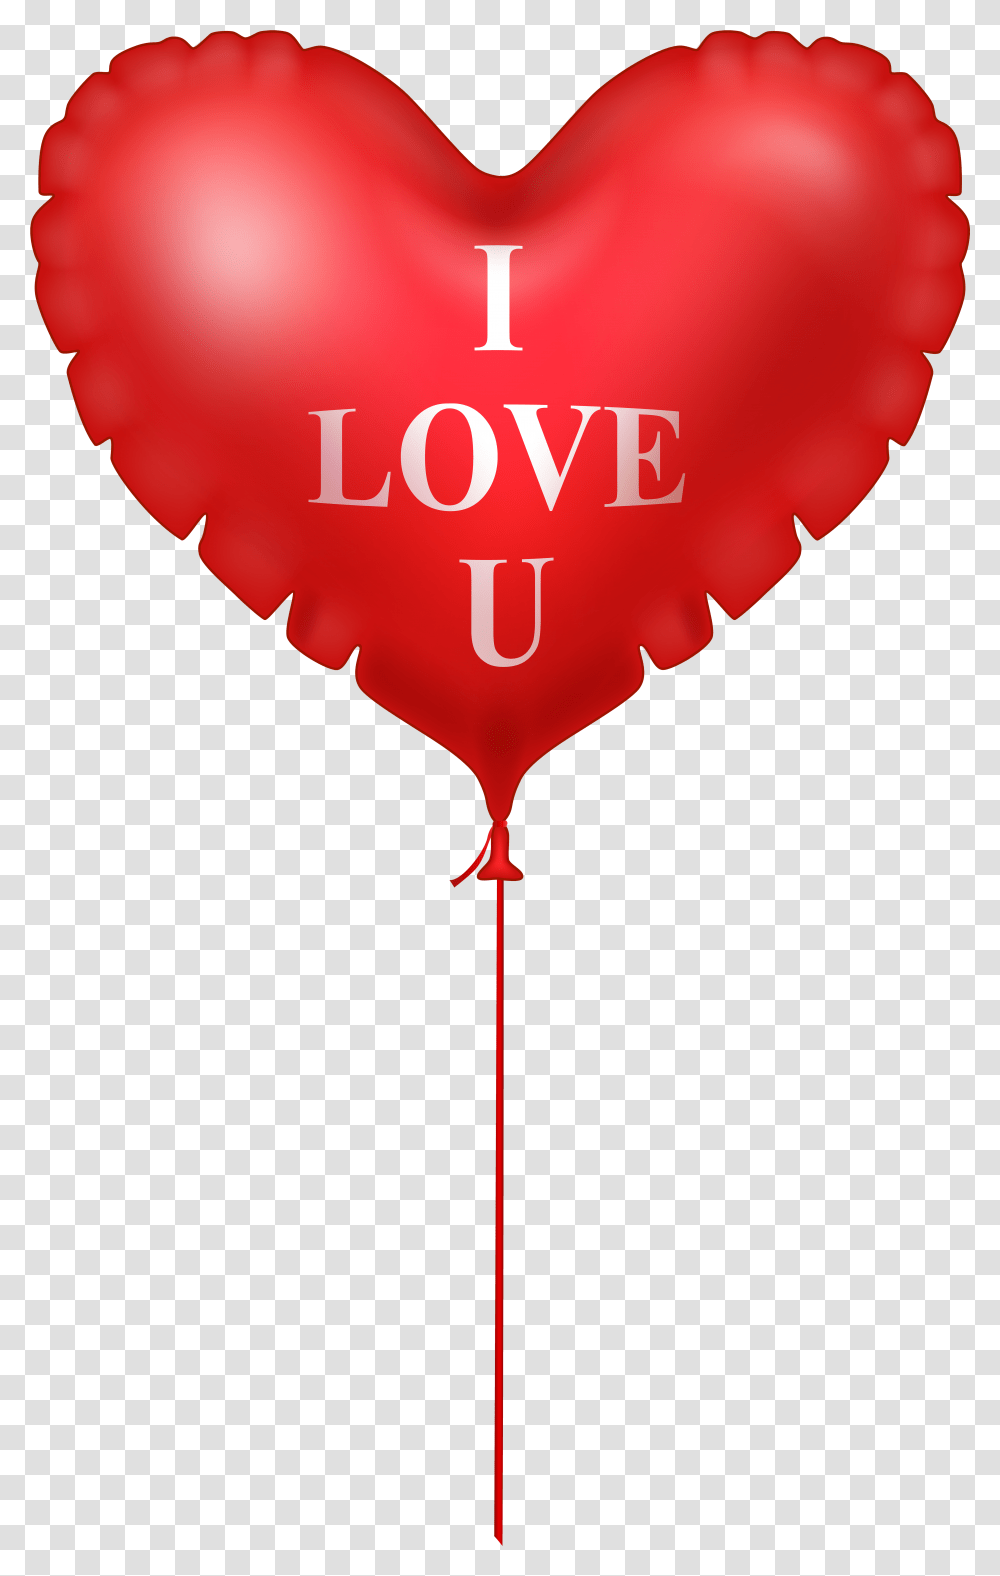 I Love You Heart Love Heart Balloon Transparent Png